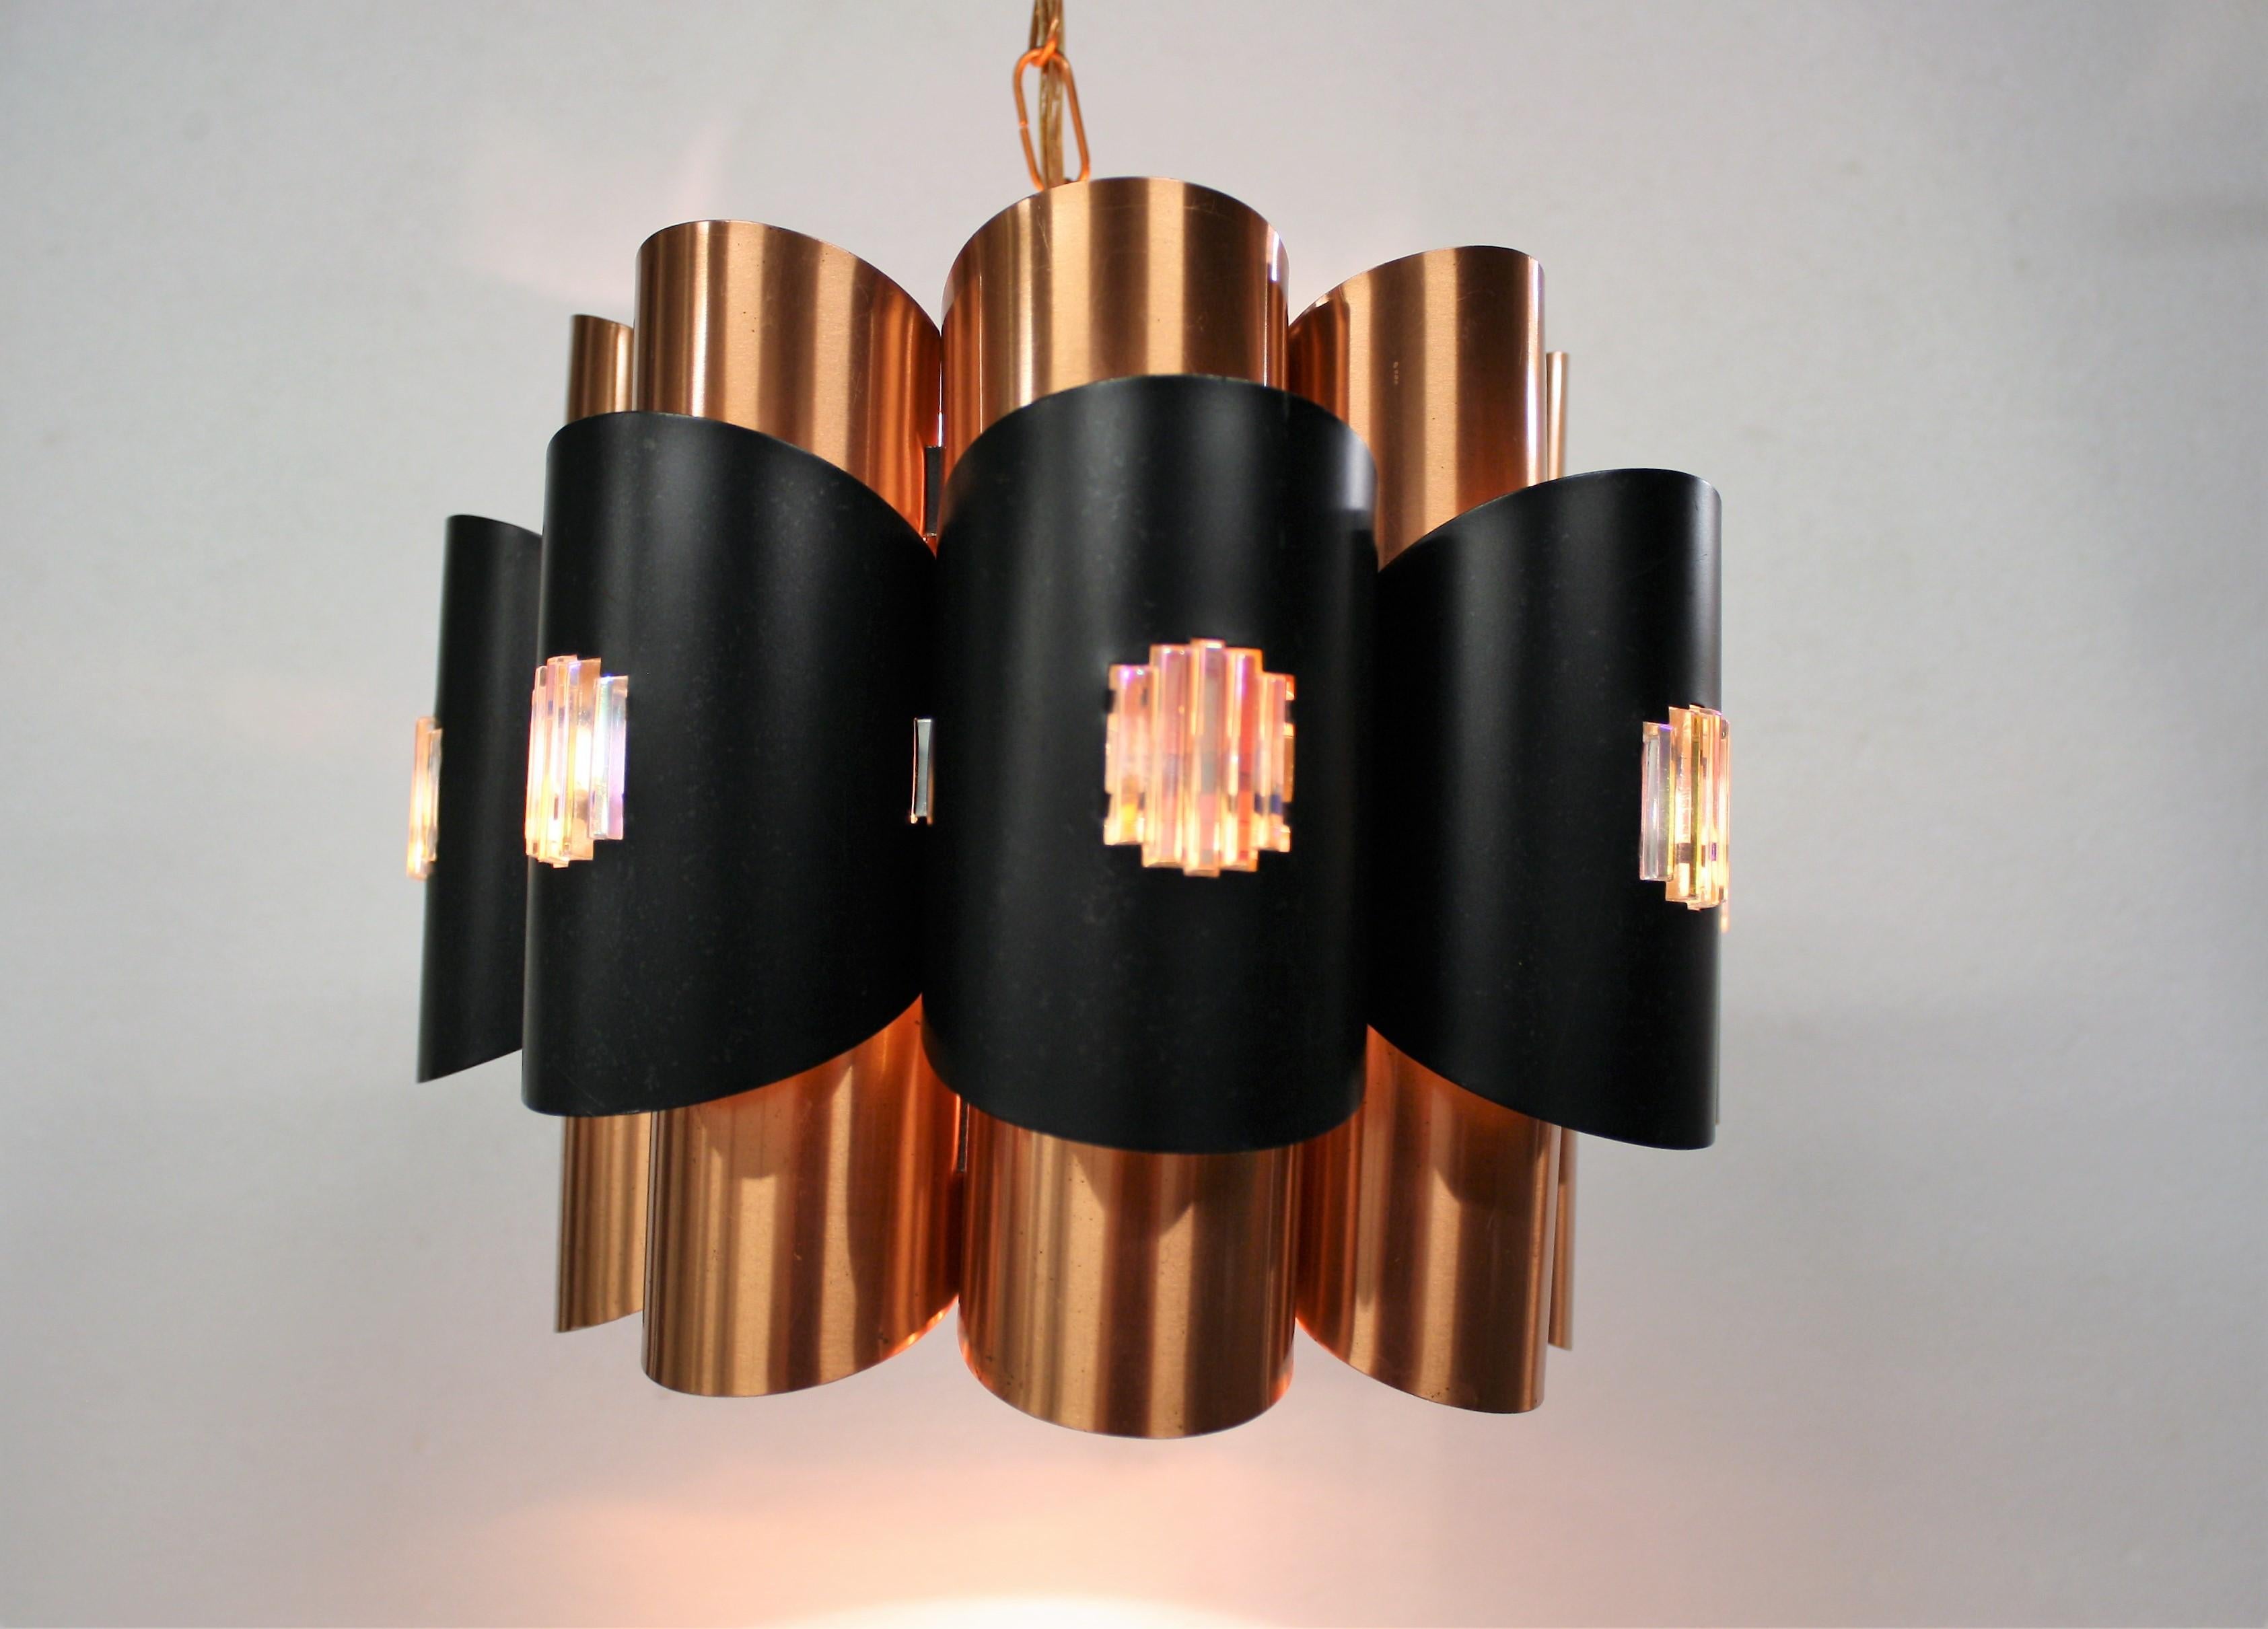 Midcentury scandinavian tubular design pendant light made from copper.

Designed by Werner Schou for Coronell Elektro in the 1960s.

The light consists of two layers of bended metal and copper sheets all brought together to create a beautiful